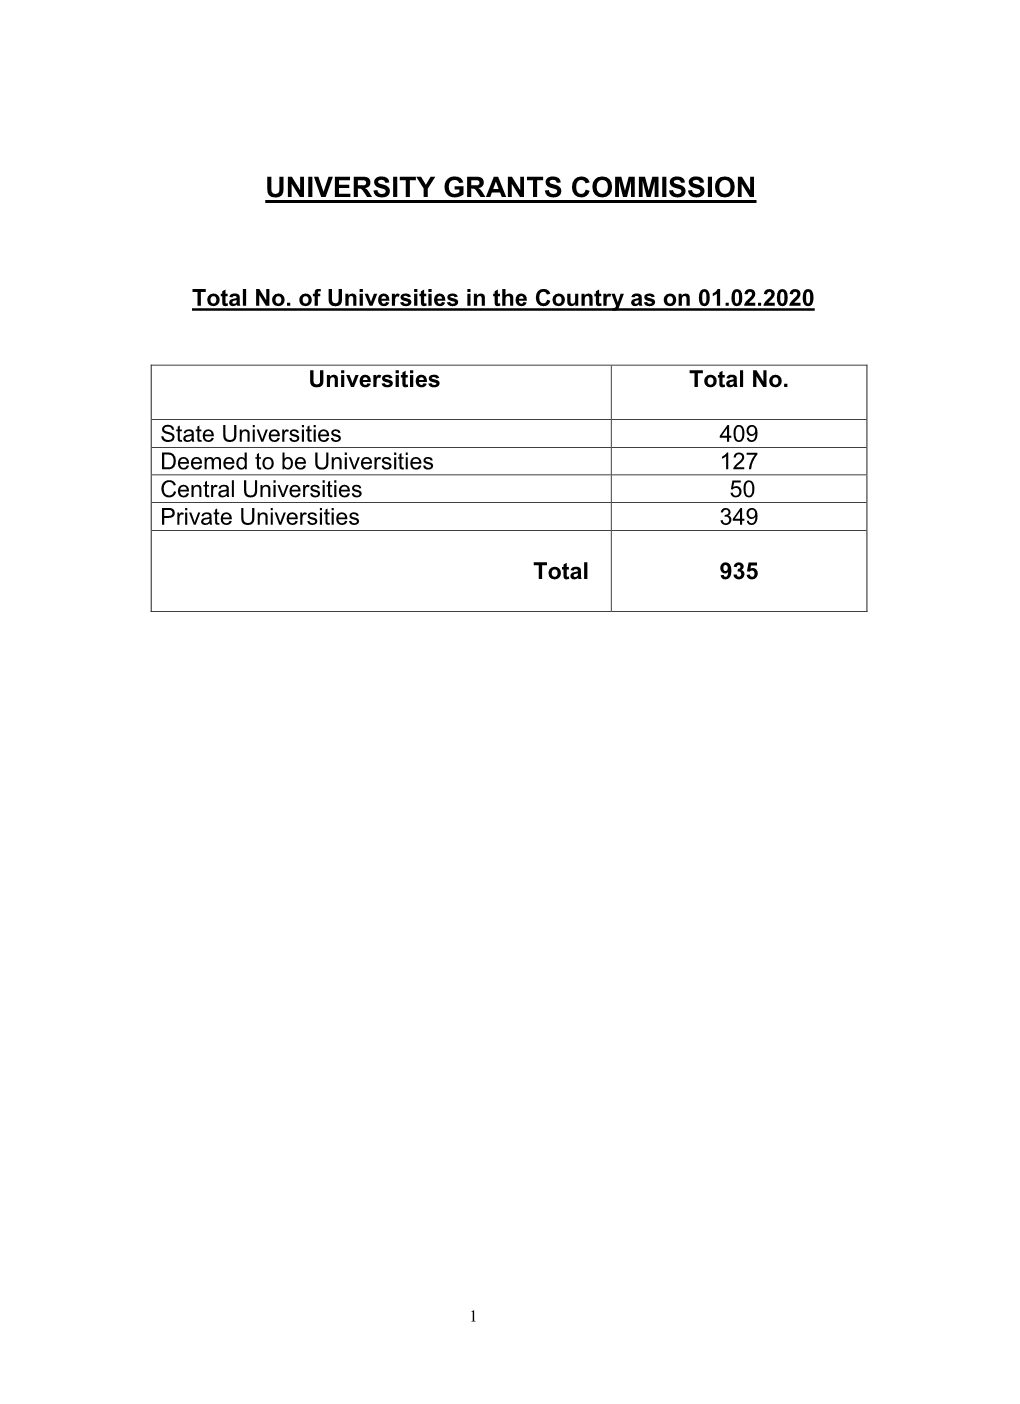 Consolidated List of All Universities